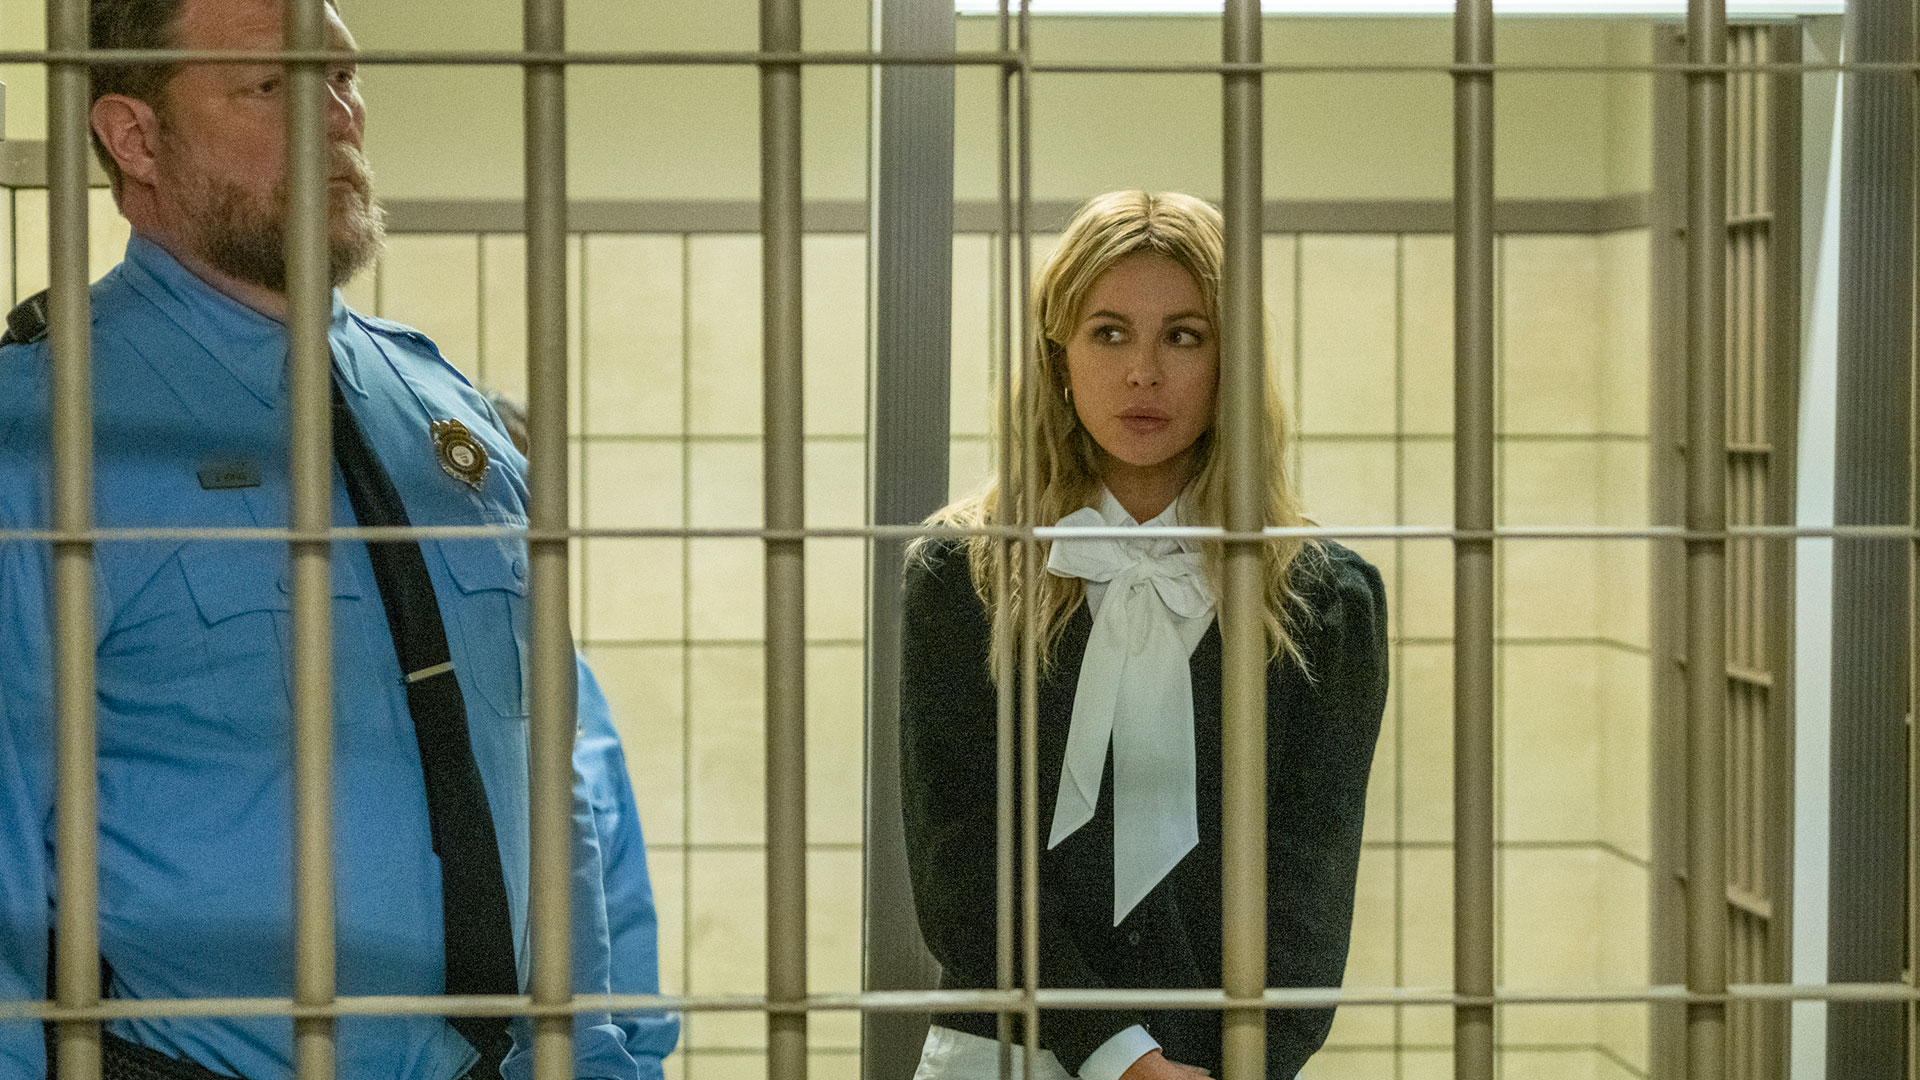 Guilty Party Starring Kate Beckinsale Premieres Oct 14 On Paramount